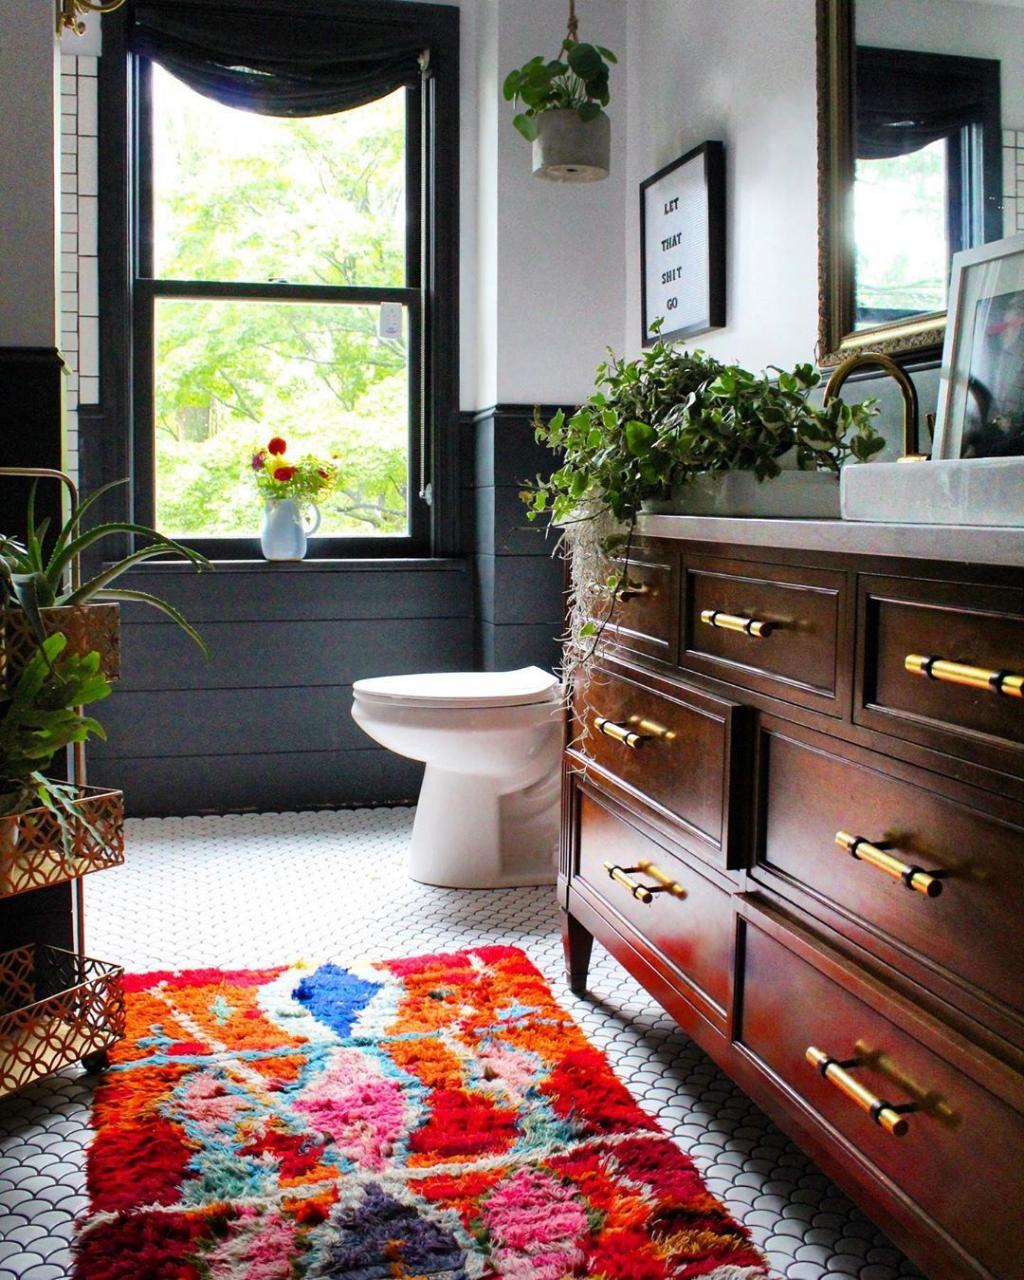 A vintageinspired bathroom Eclectic home, Eclectic bathroom, Home